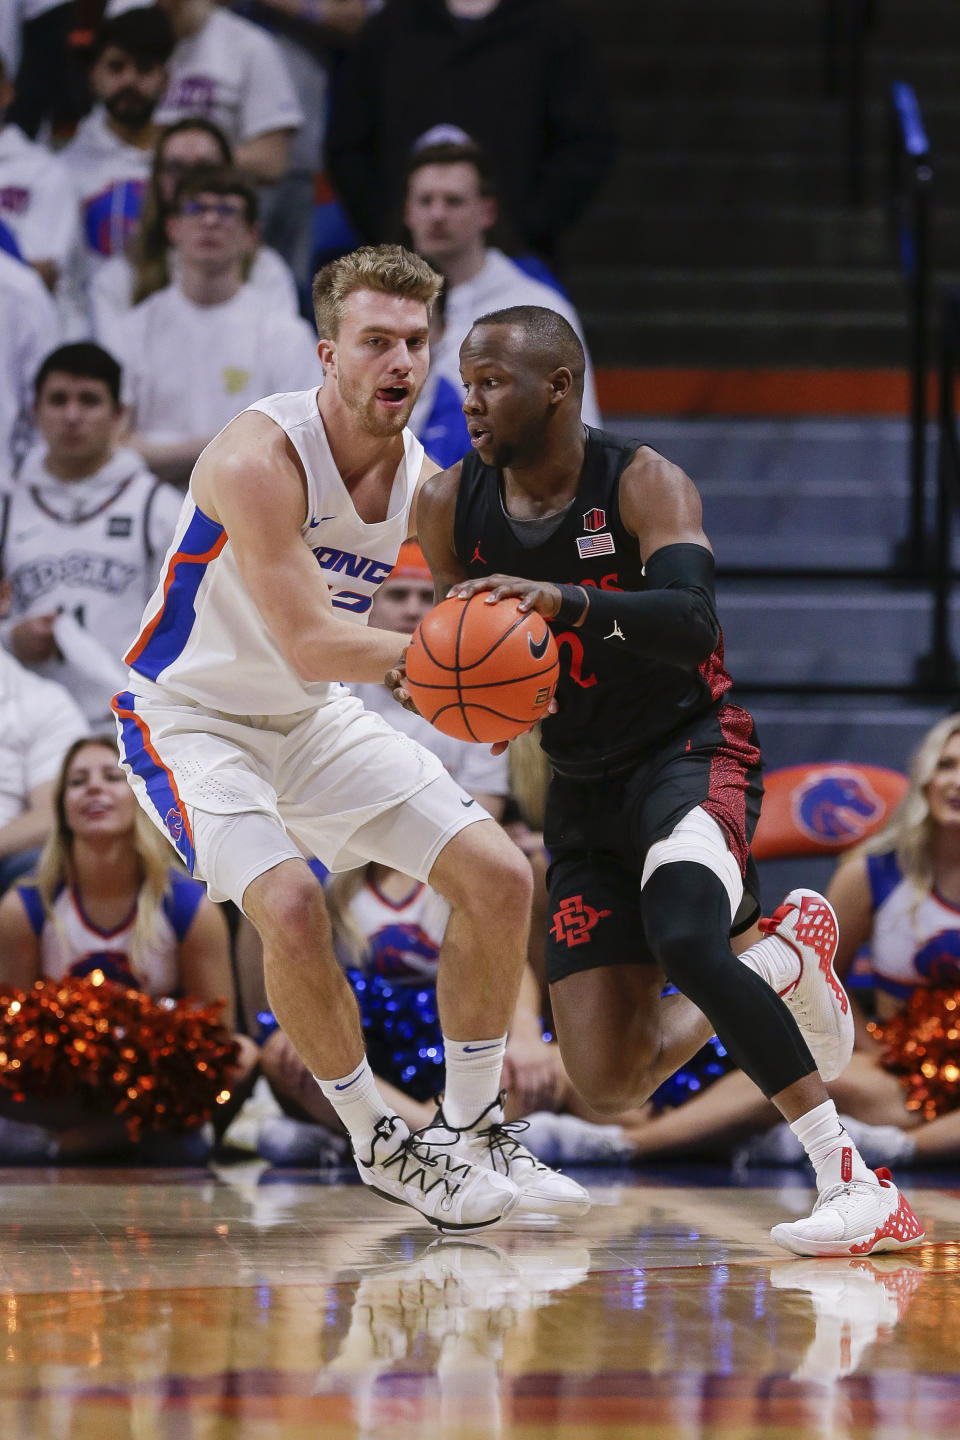 San Diego State guard Adam Seiko (2) drives against Boise State guard Max Rice (12) during the second half of an NCAA college basketball game Sunday, Feb. 16, 2020, in Boise, Idaho. San Diego State won 72-55. (AP Photo/Steve Conner)